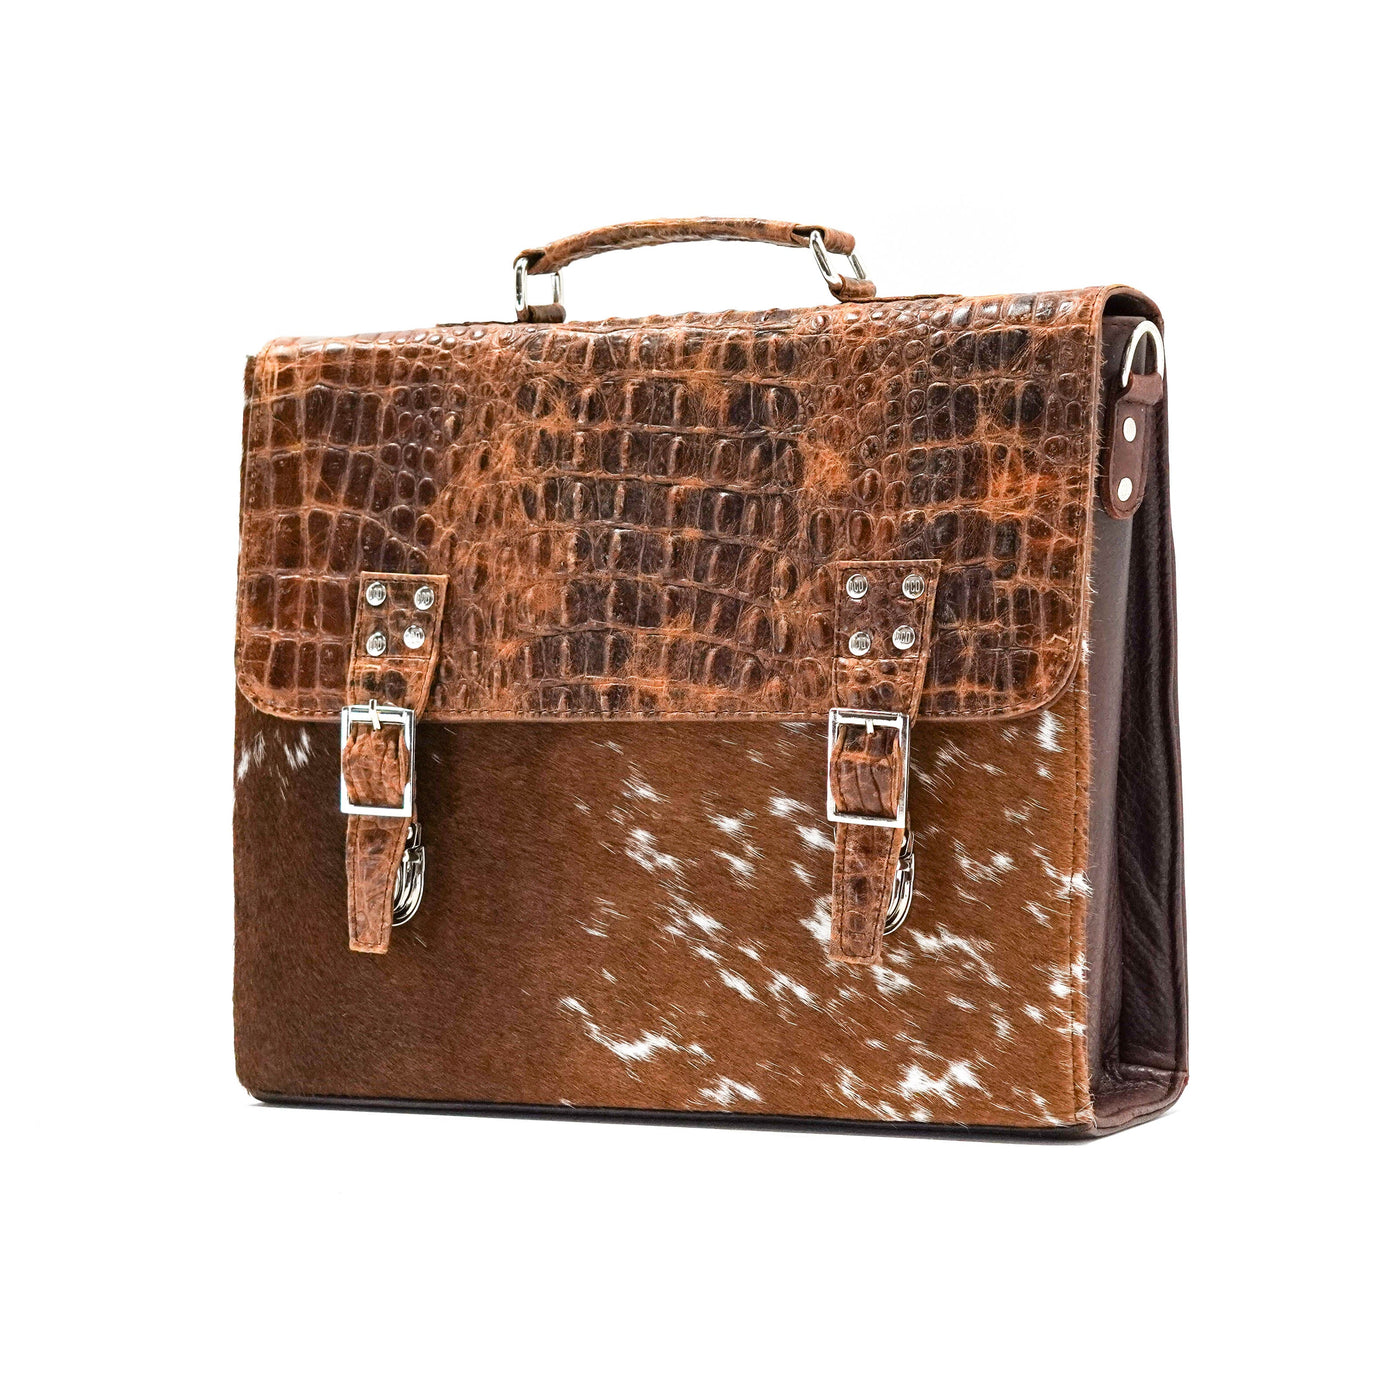 Briefcase - Longhorn w/ Saddle Croc-Briefcase-Western-Cowhide-Bags-Handmade-Products-Gifts-Dancing Cactus Designs